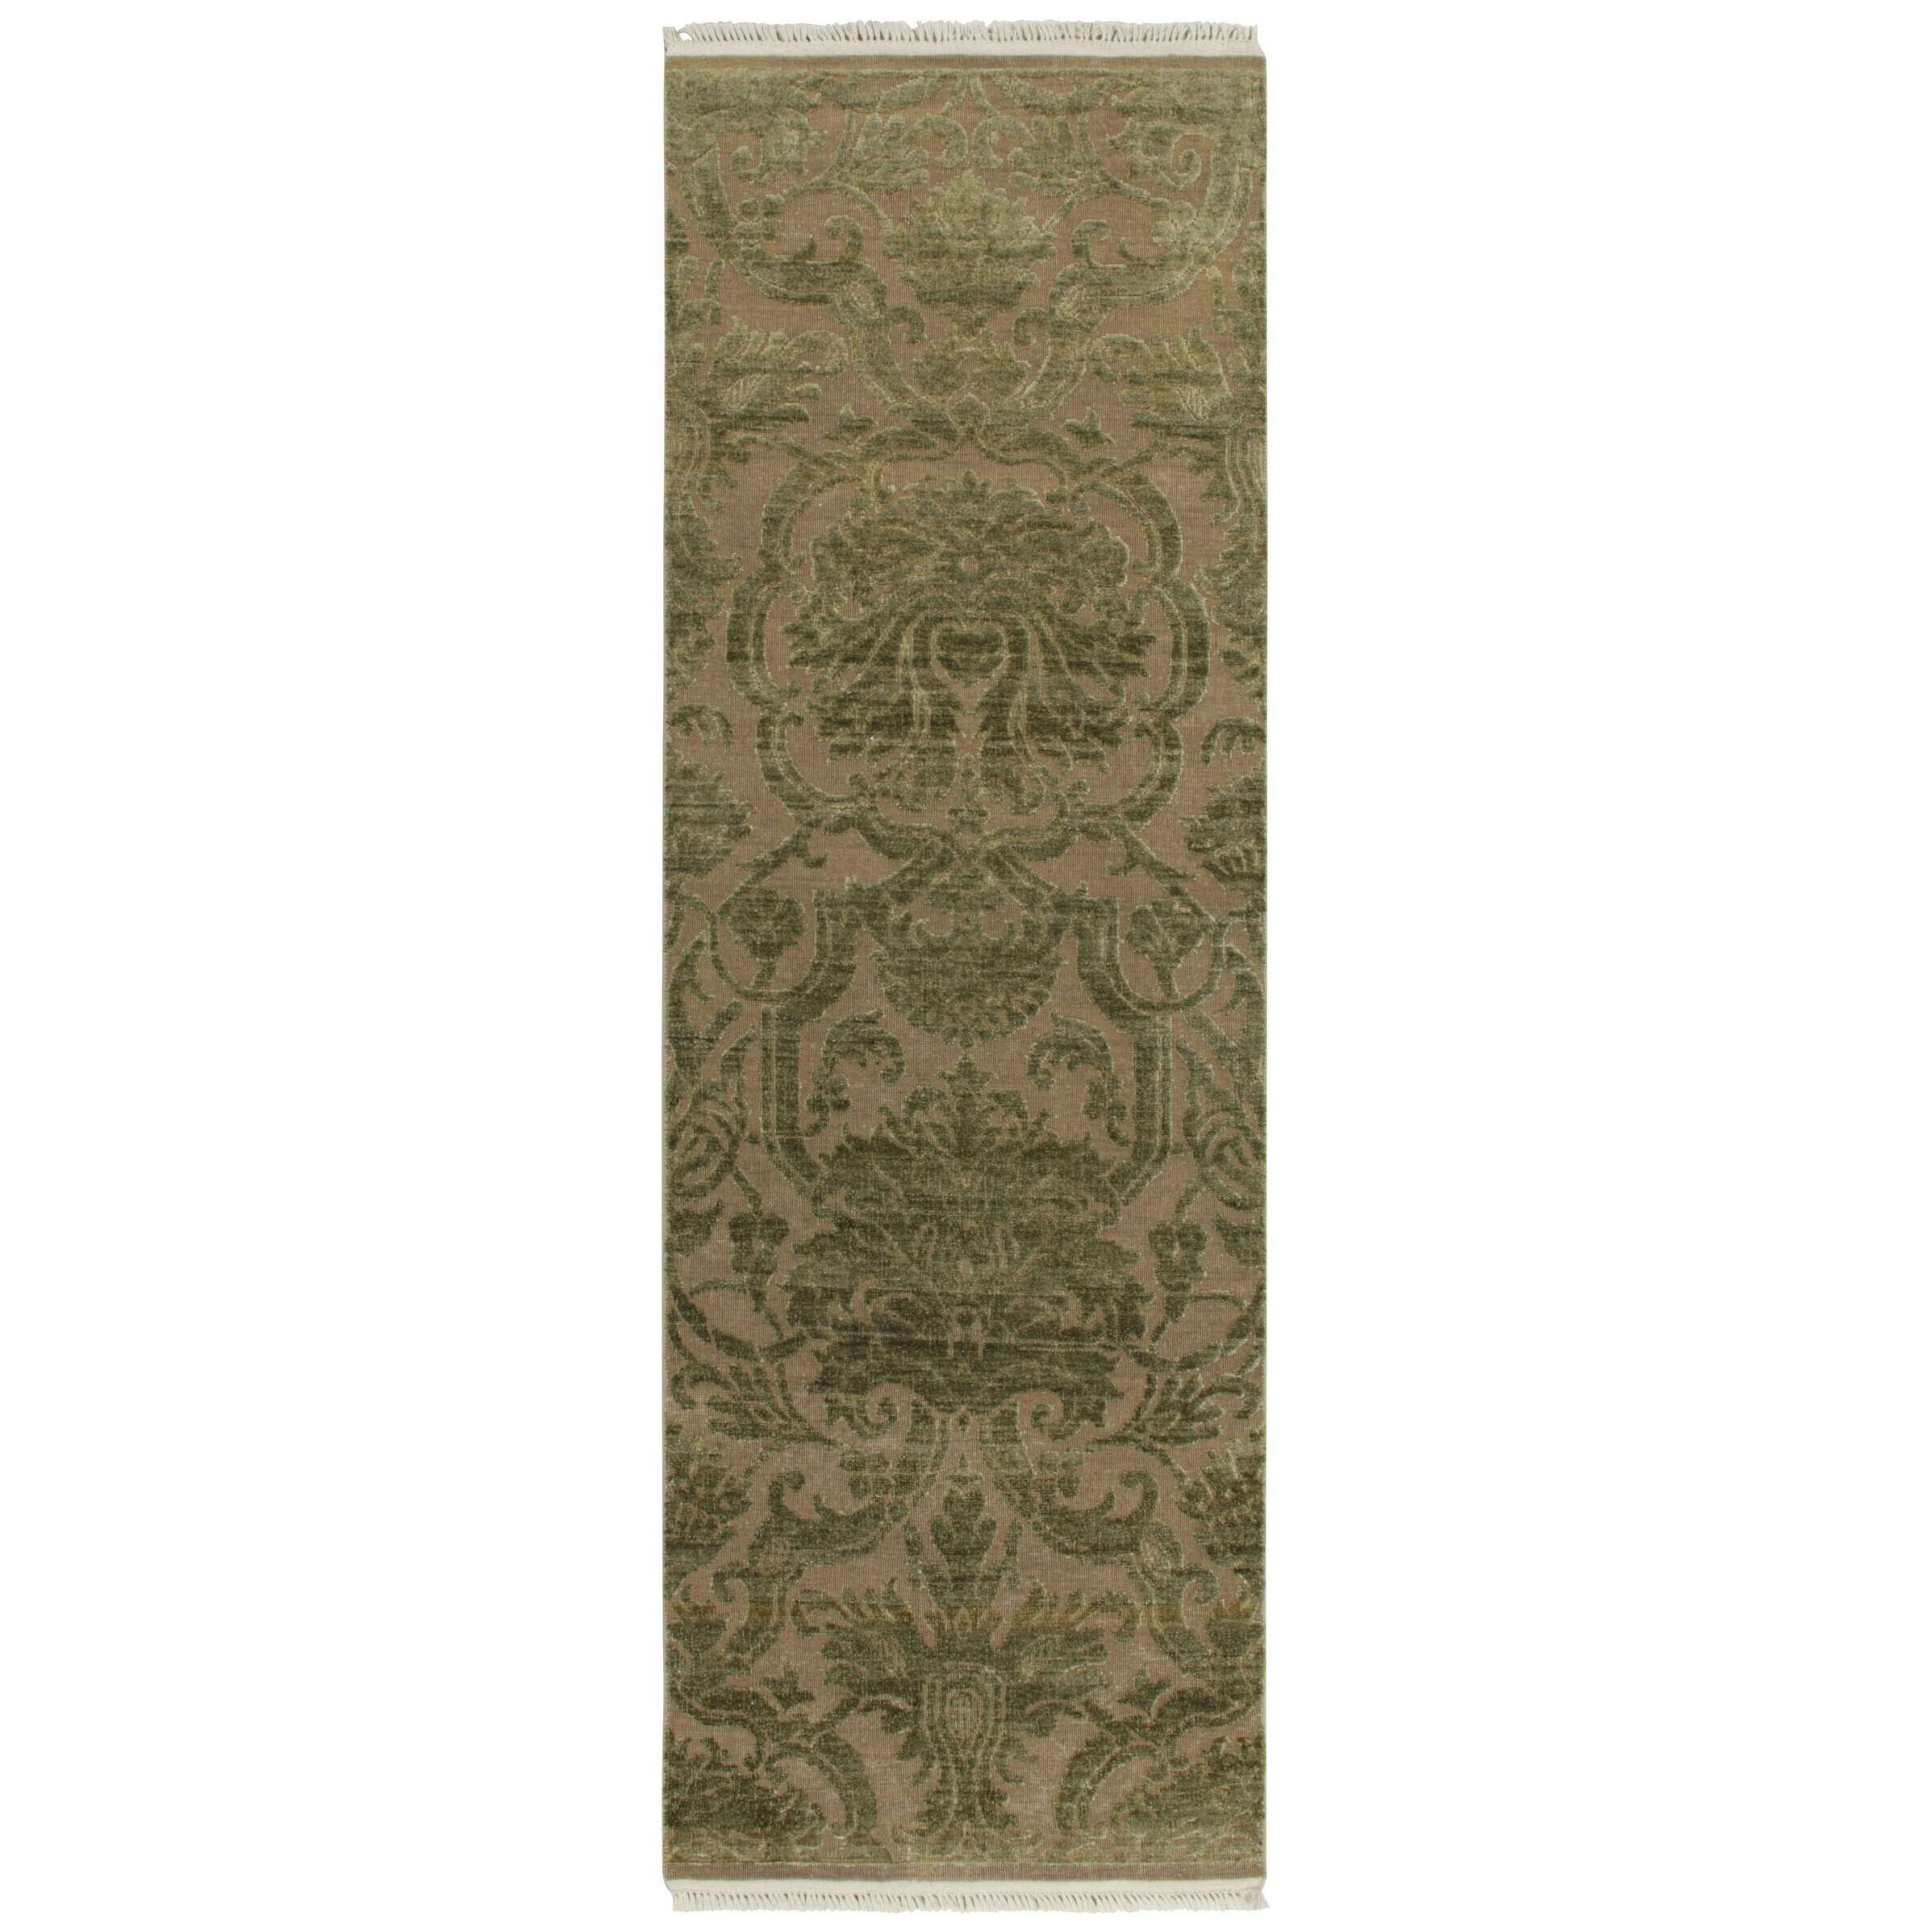 Rug & Kilim’s European Style Runner in Beige With Green Floral Patterns